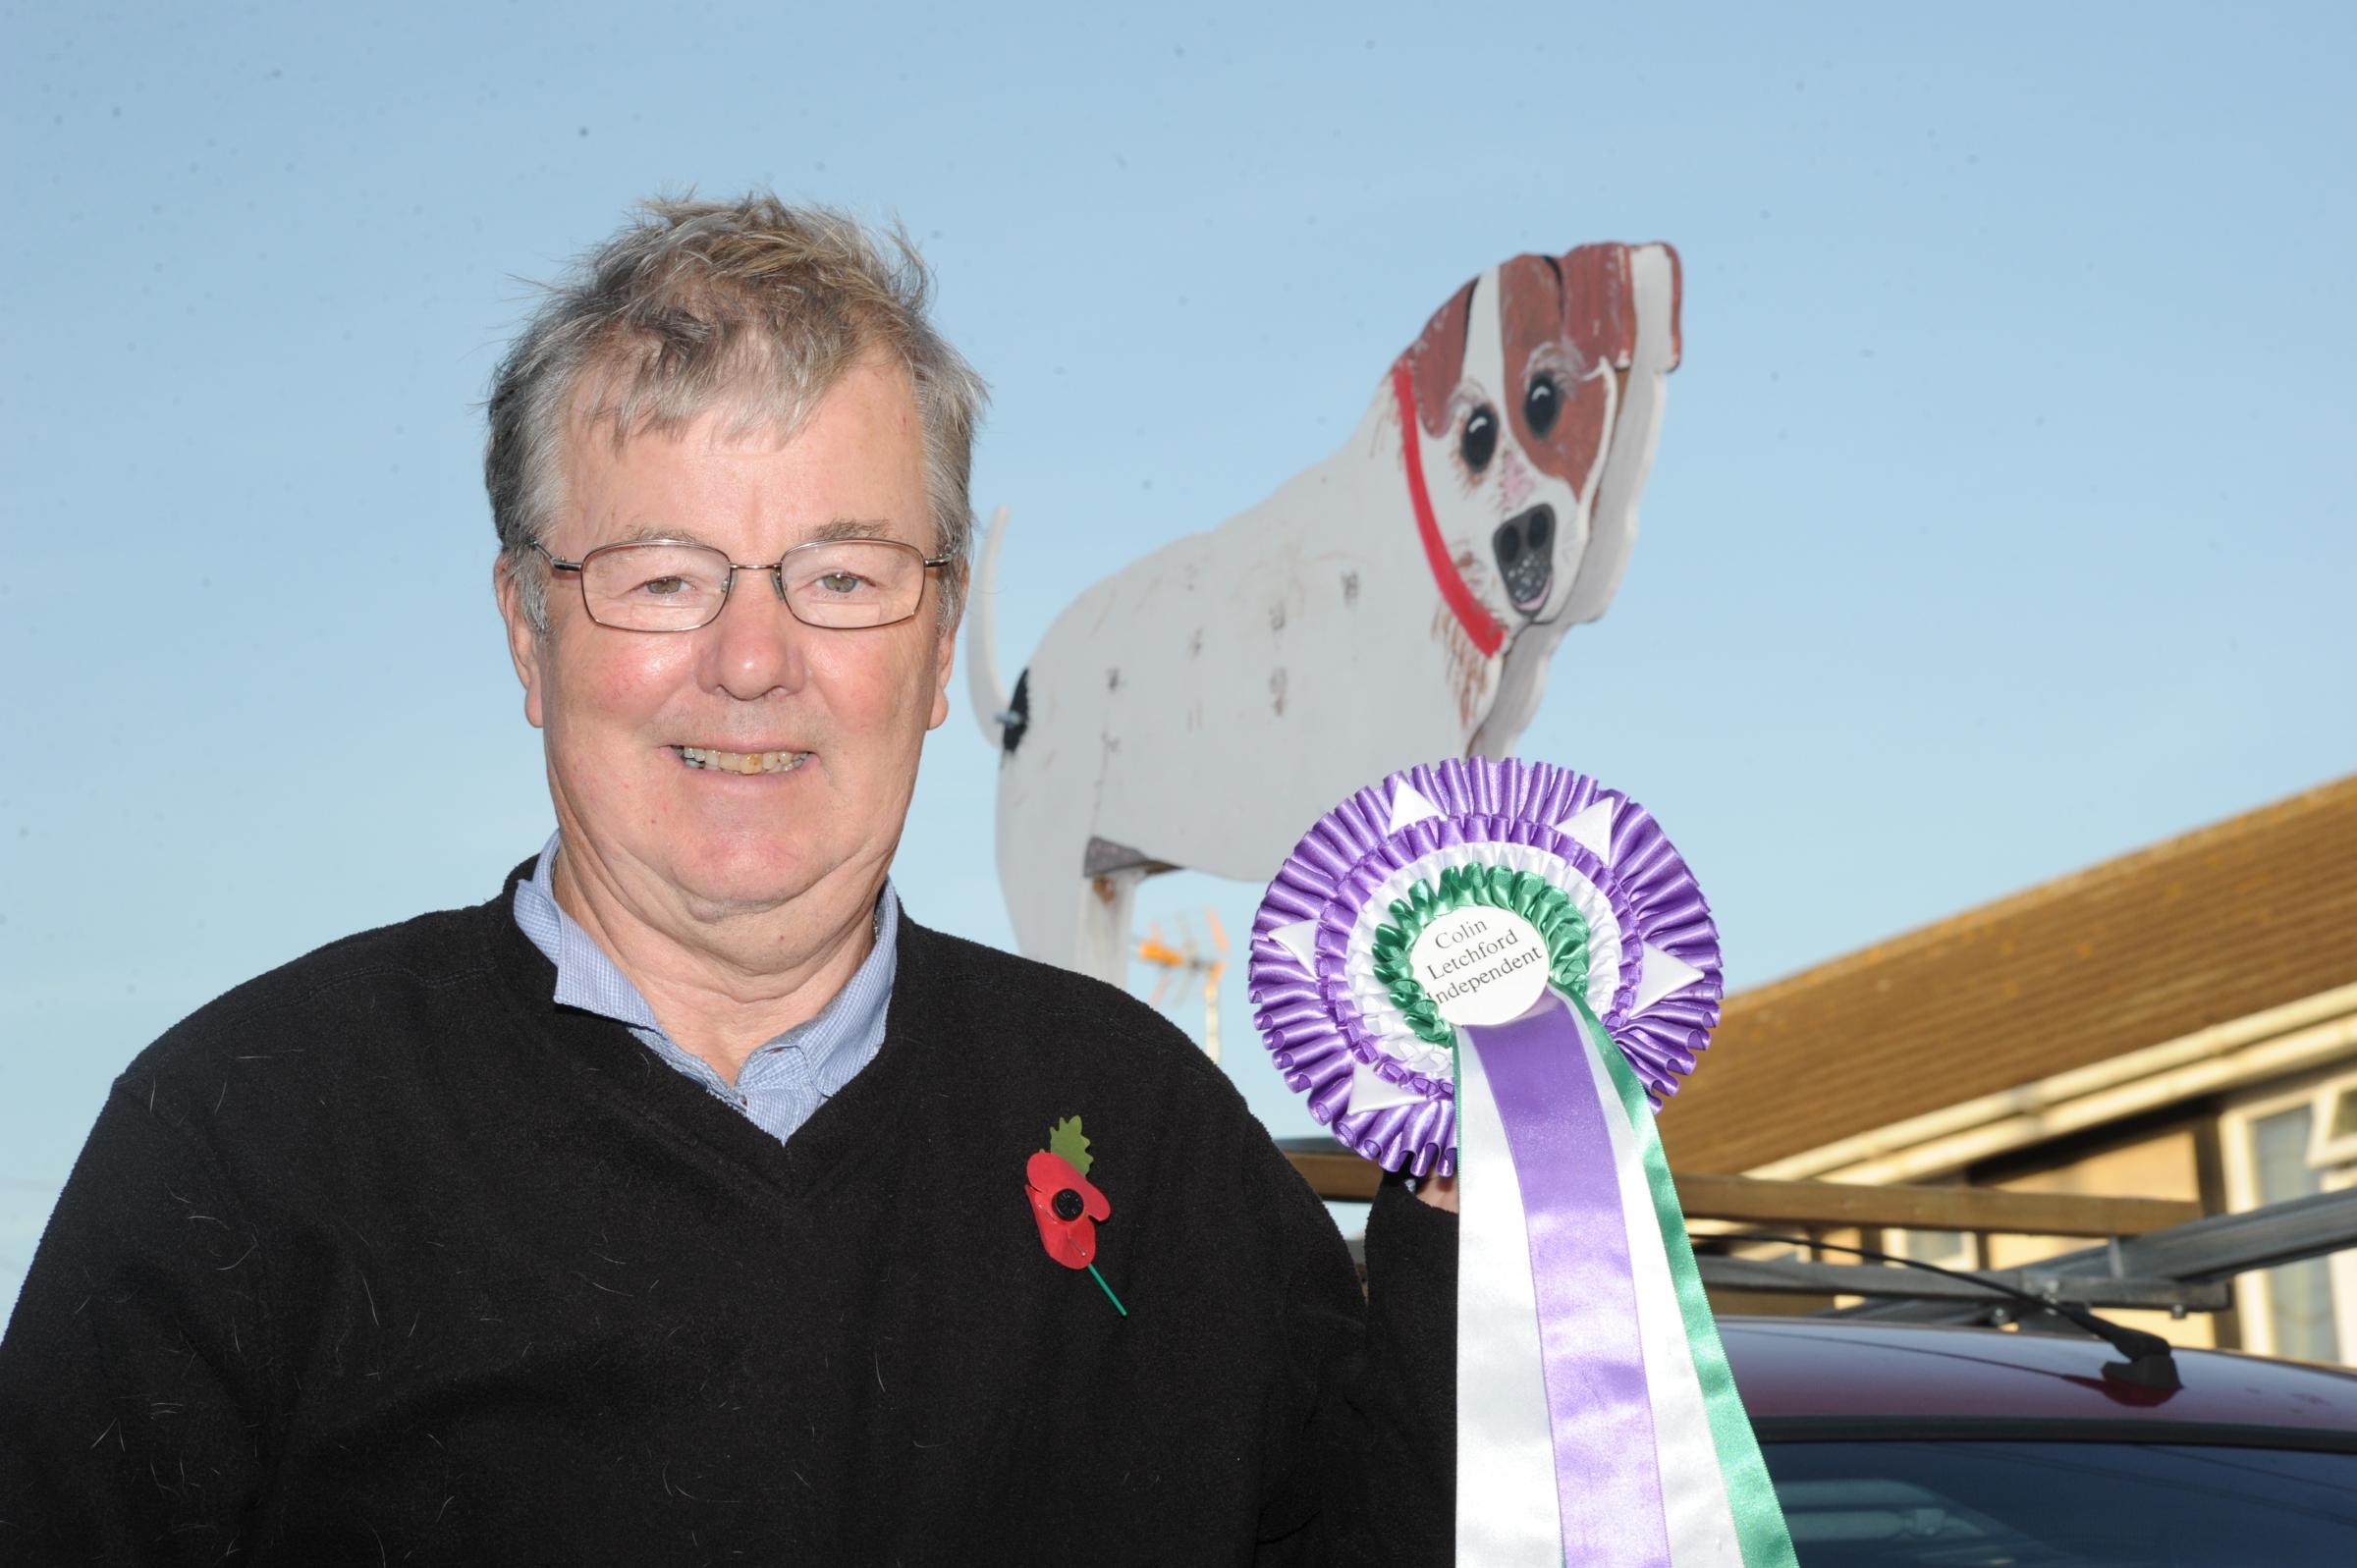 Fun - Colin Letchford won the Canvey East by-election in 2014 after campaigning with a dog cutout-style poster